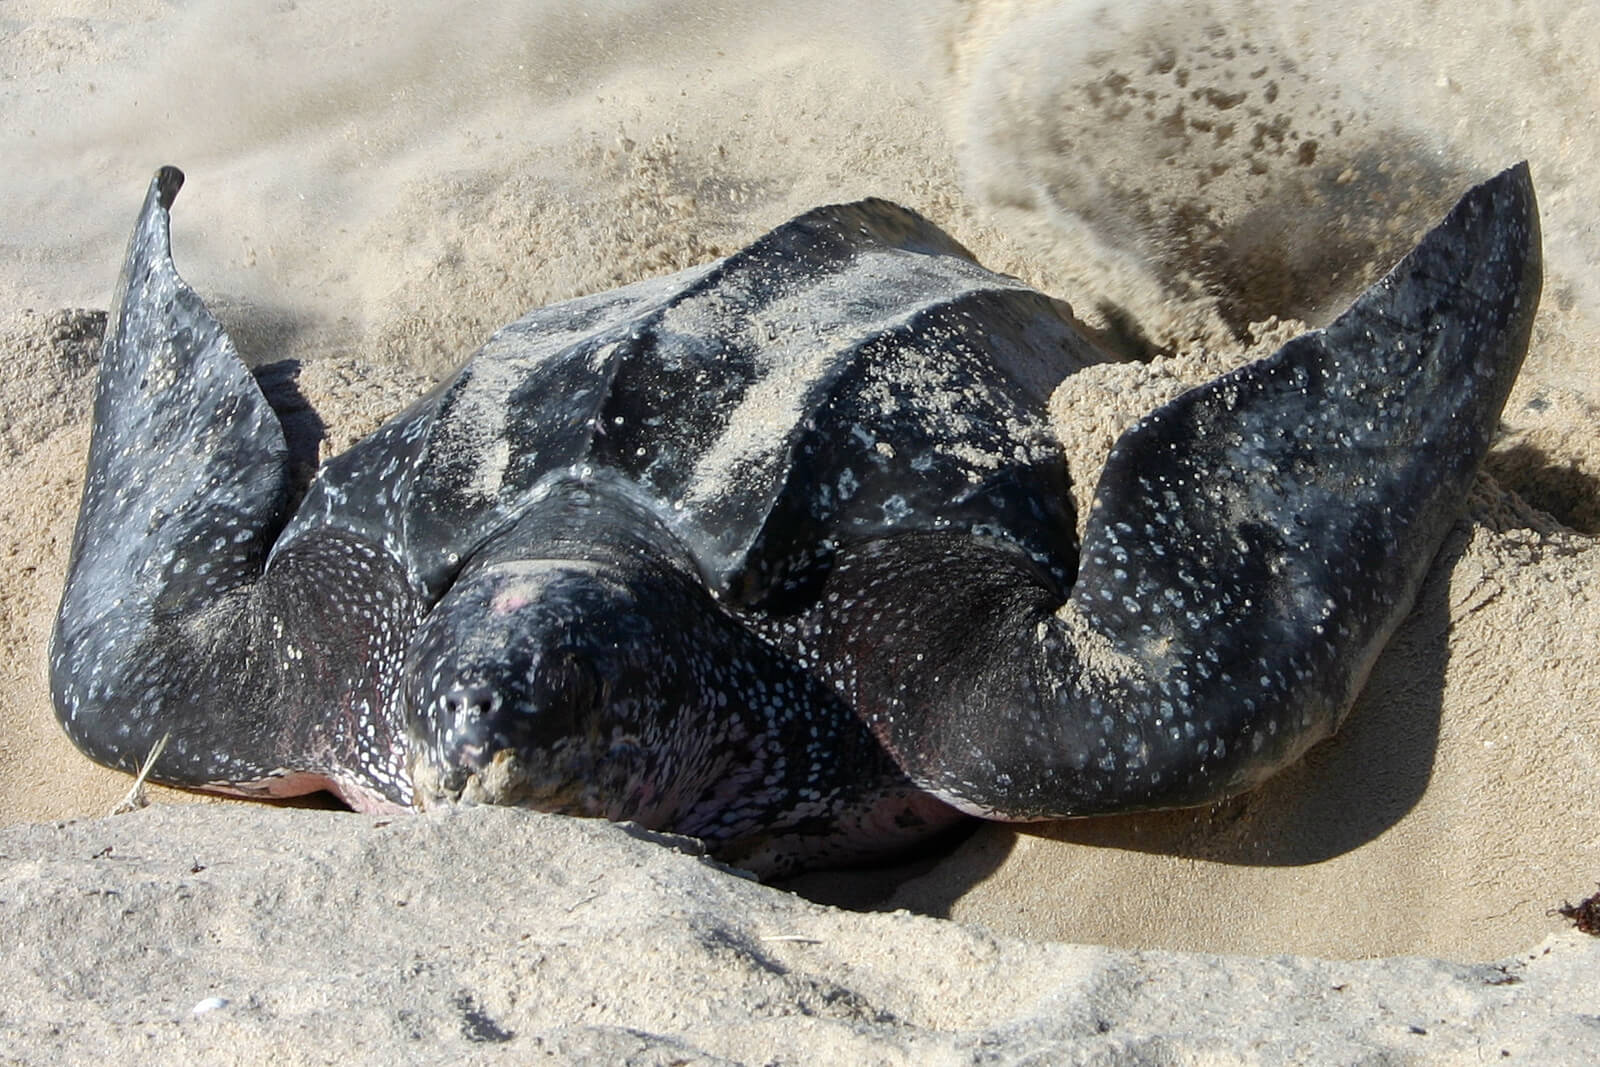 Leatherback turtle nesting on the beach photo by Florida Fish and Wildlife | Must Do Visitor Guides, MustDo.com